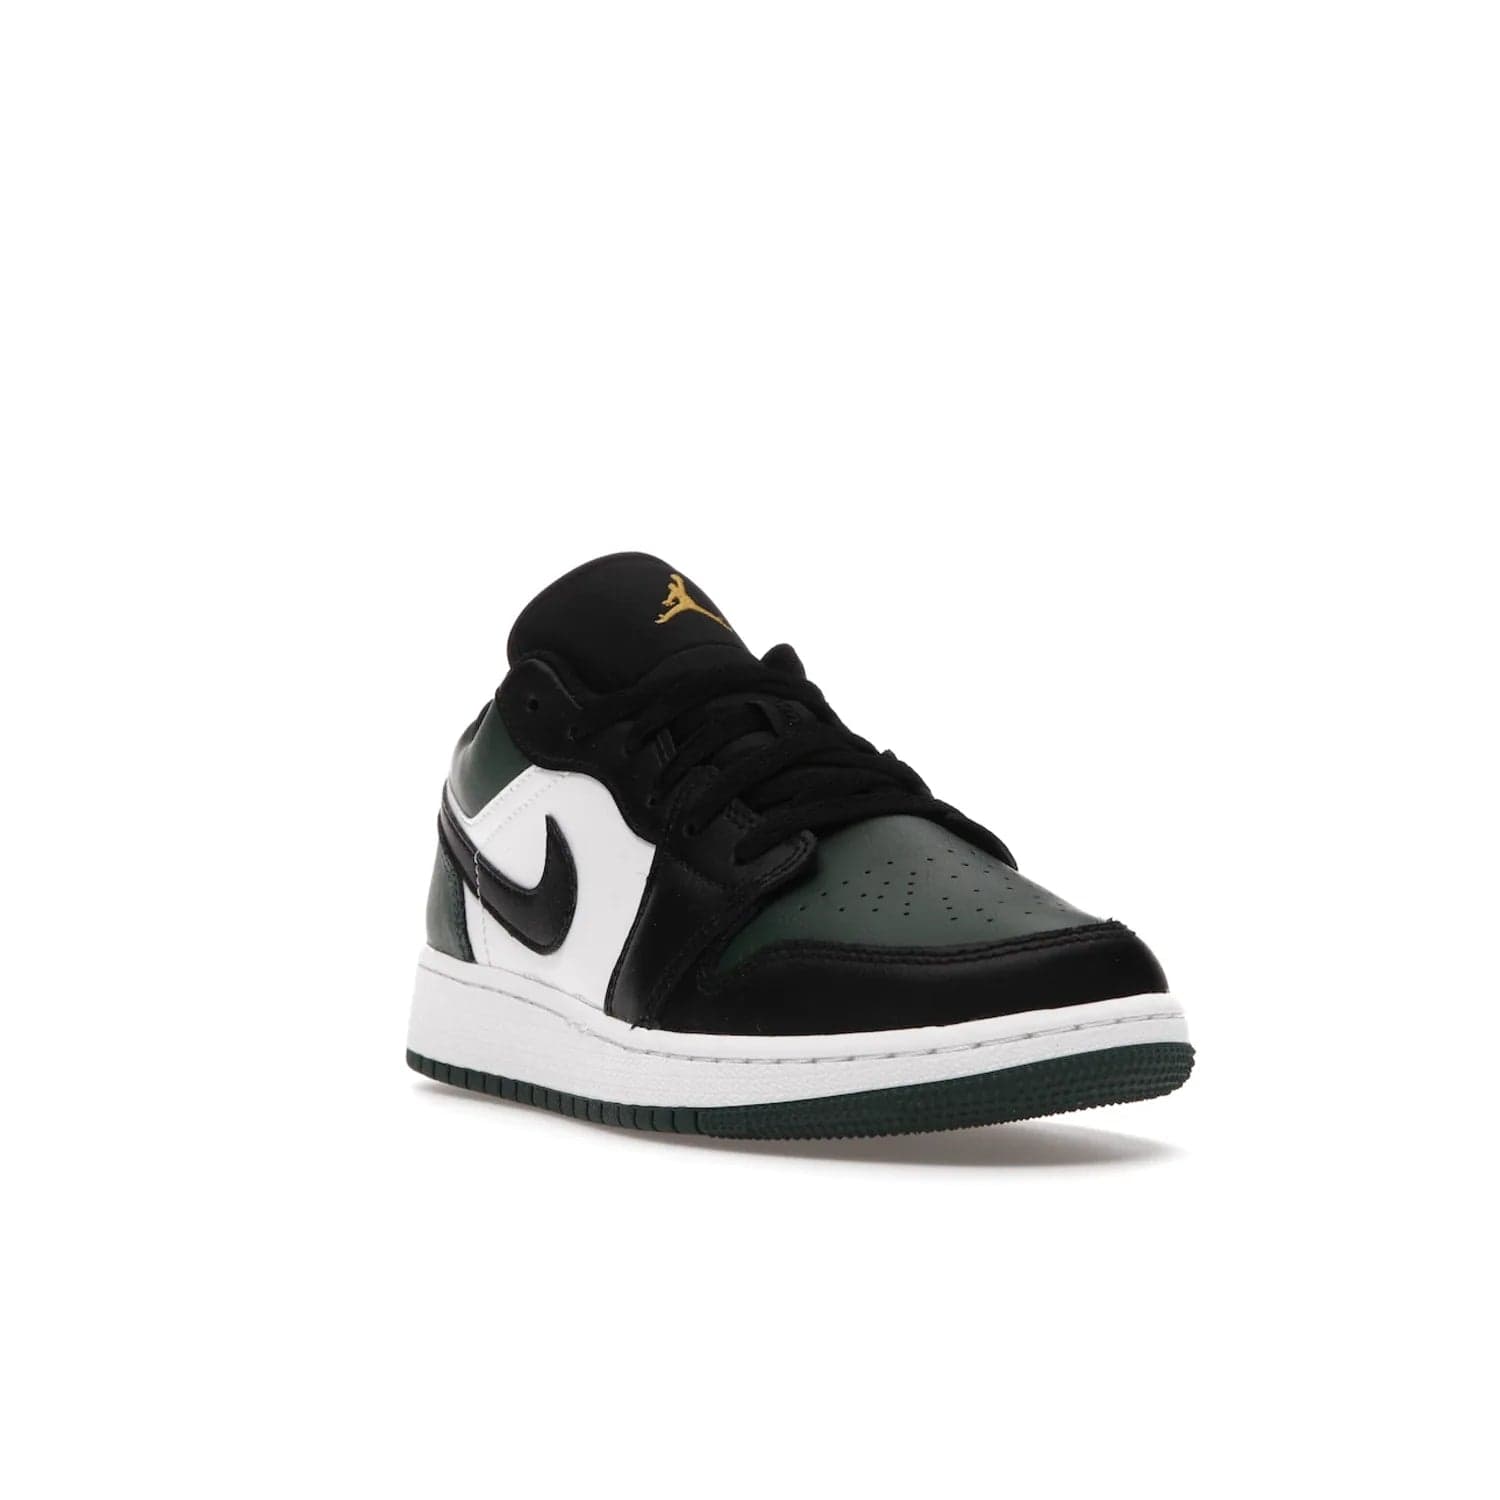 Jordan 1 Low Green Toe (GS) - Image 7 - Only at www.BallersClubKickz.com - Get the perfect low cut Jordans. Shop the Air Jordan 1 Low Noble Green GS shoes with its unique colorway and stencil Jumpman logo. Available October 2021.